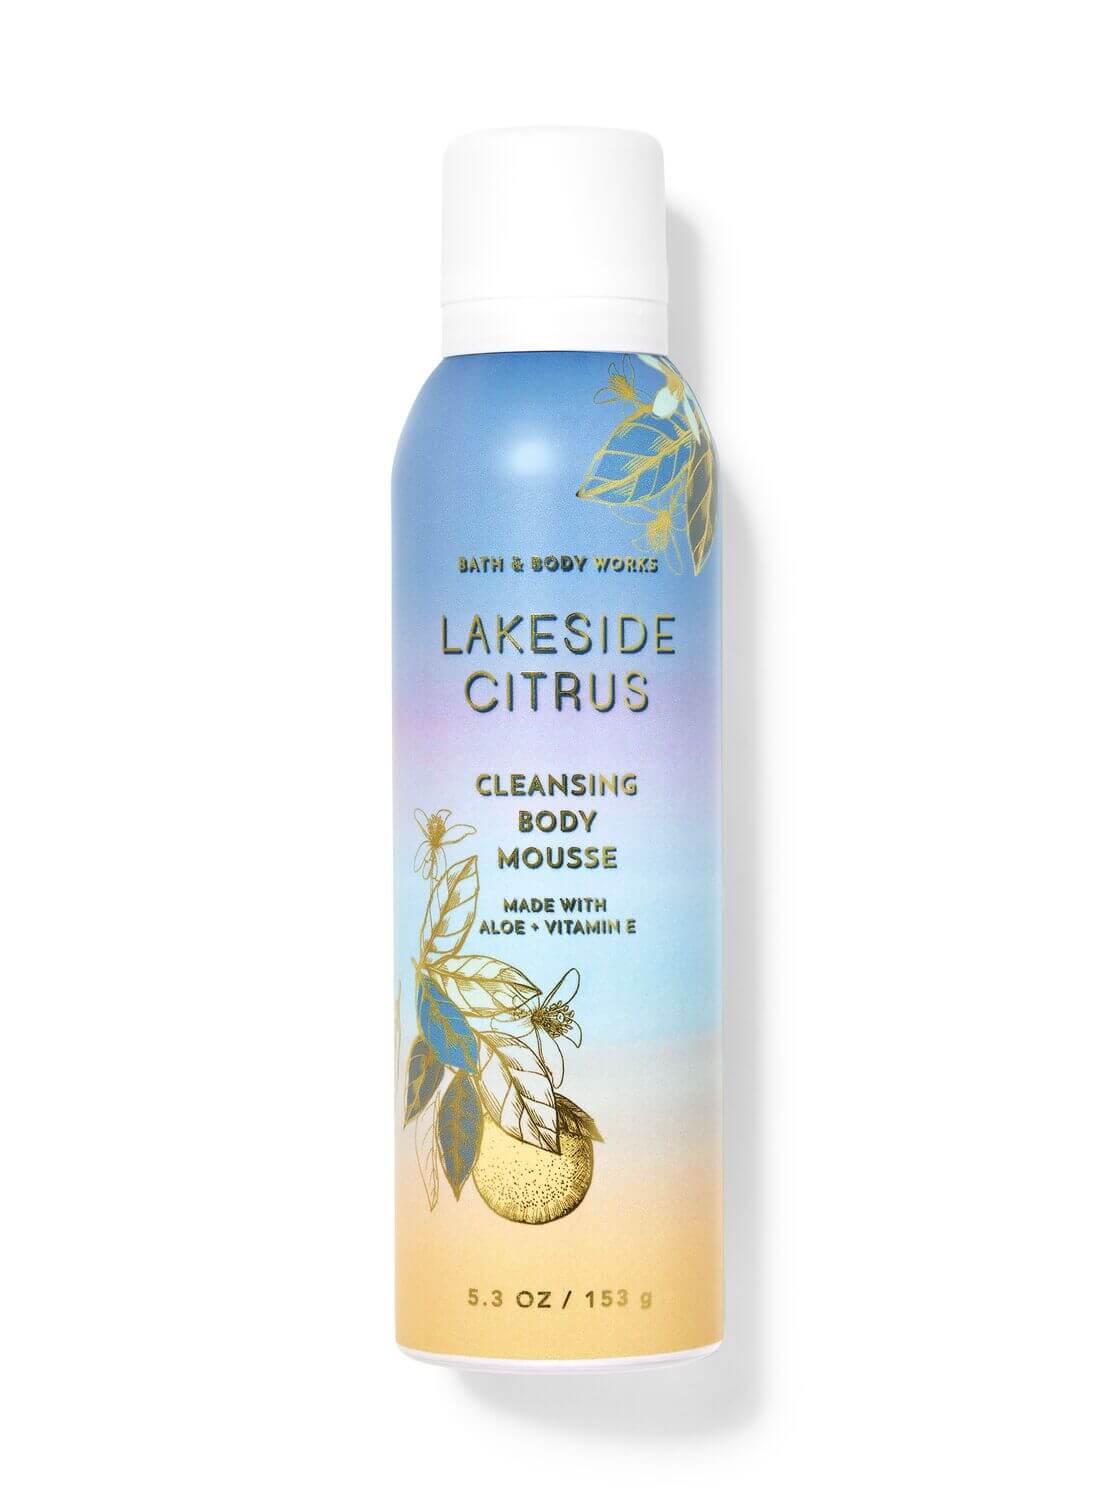 Bath & Body Works Lakeside Citrus Cleansing Body Mousse 153g